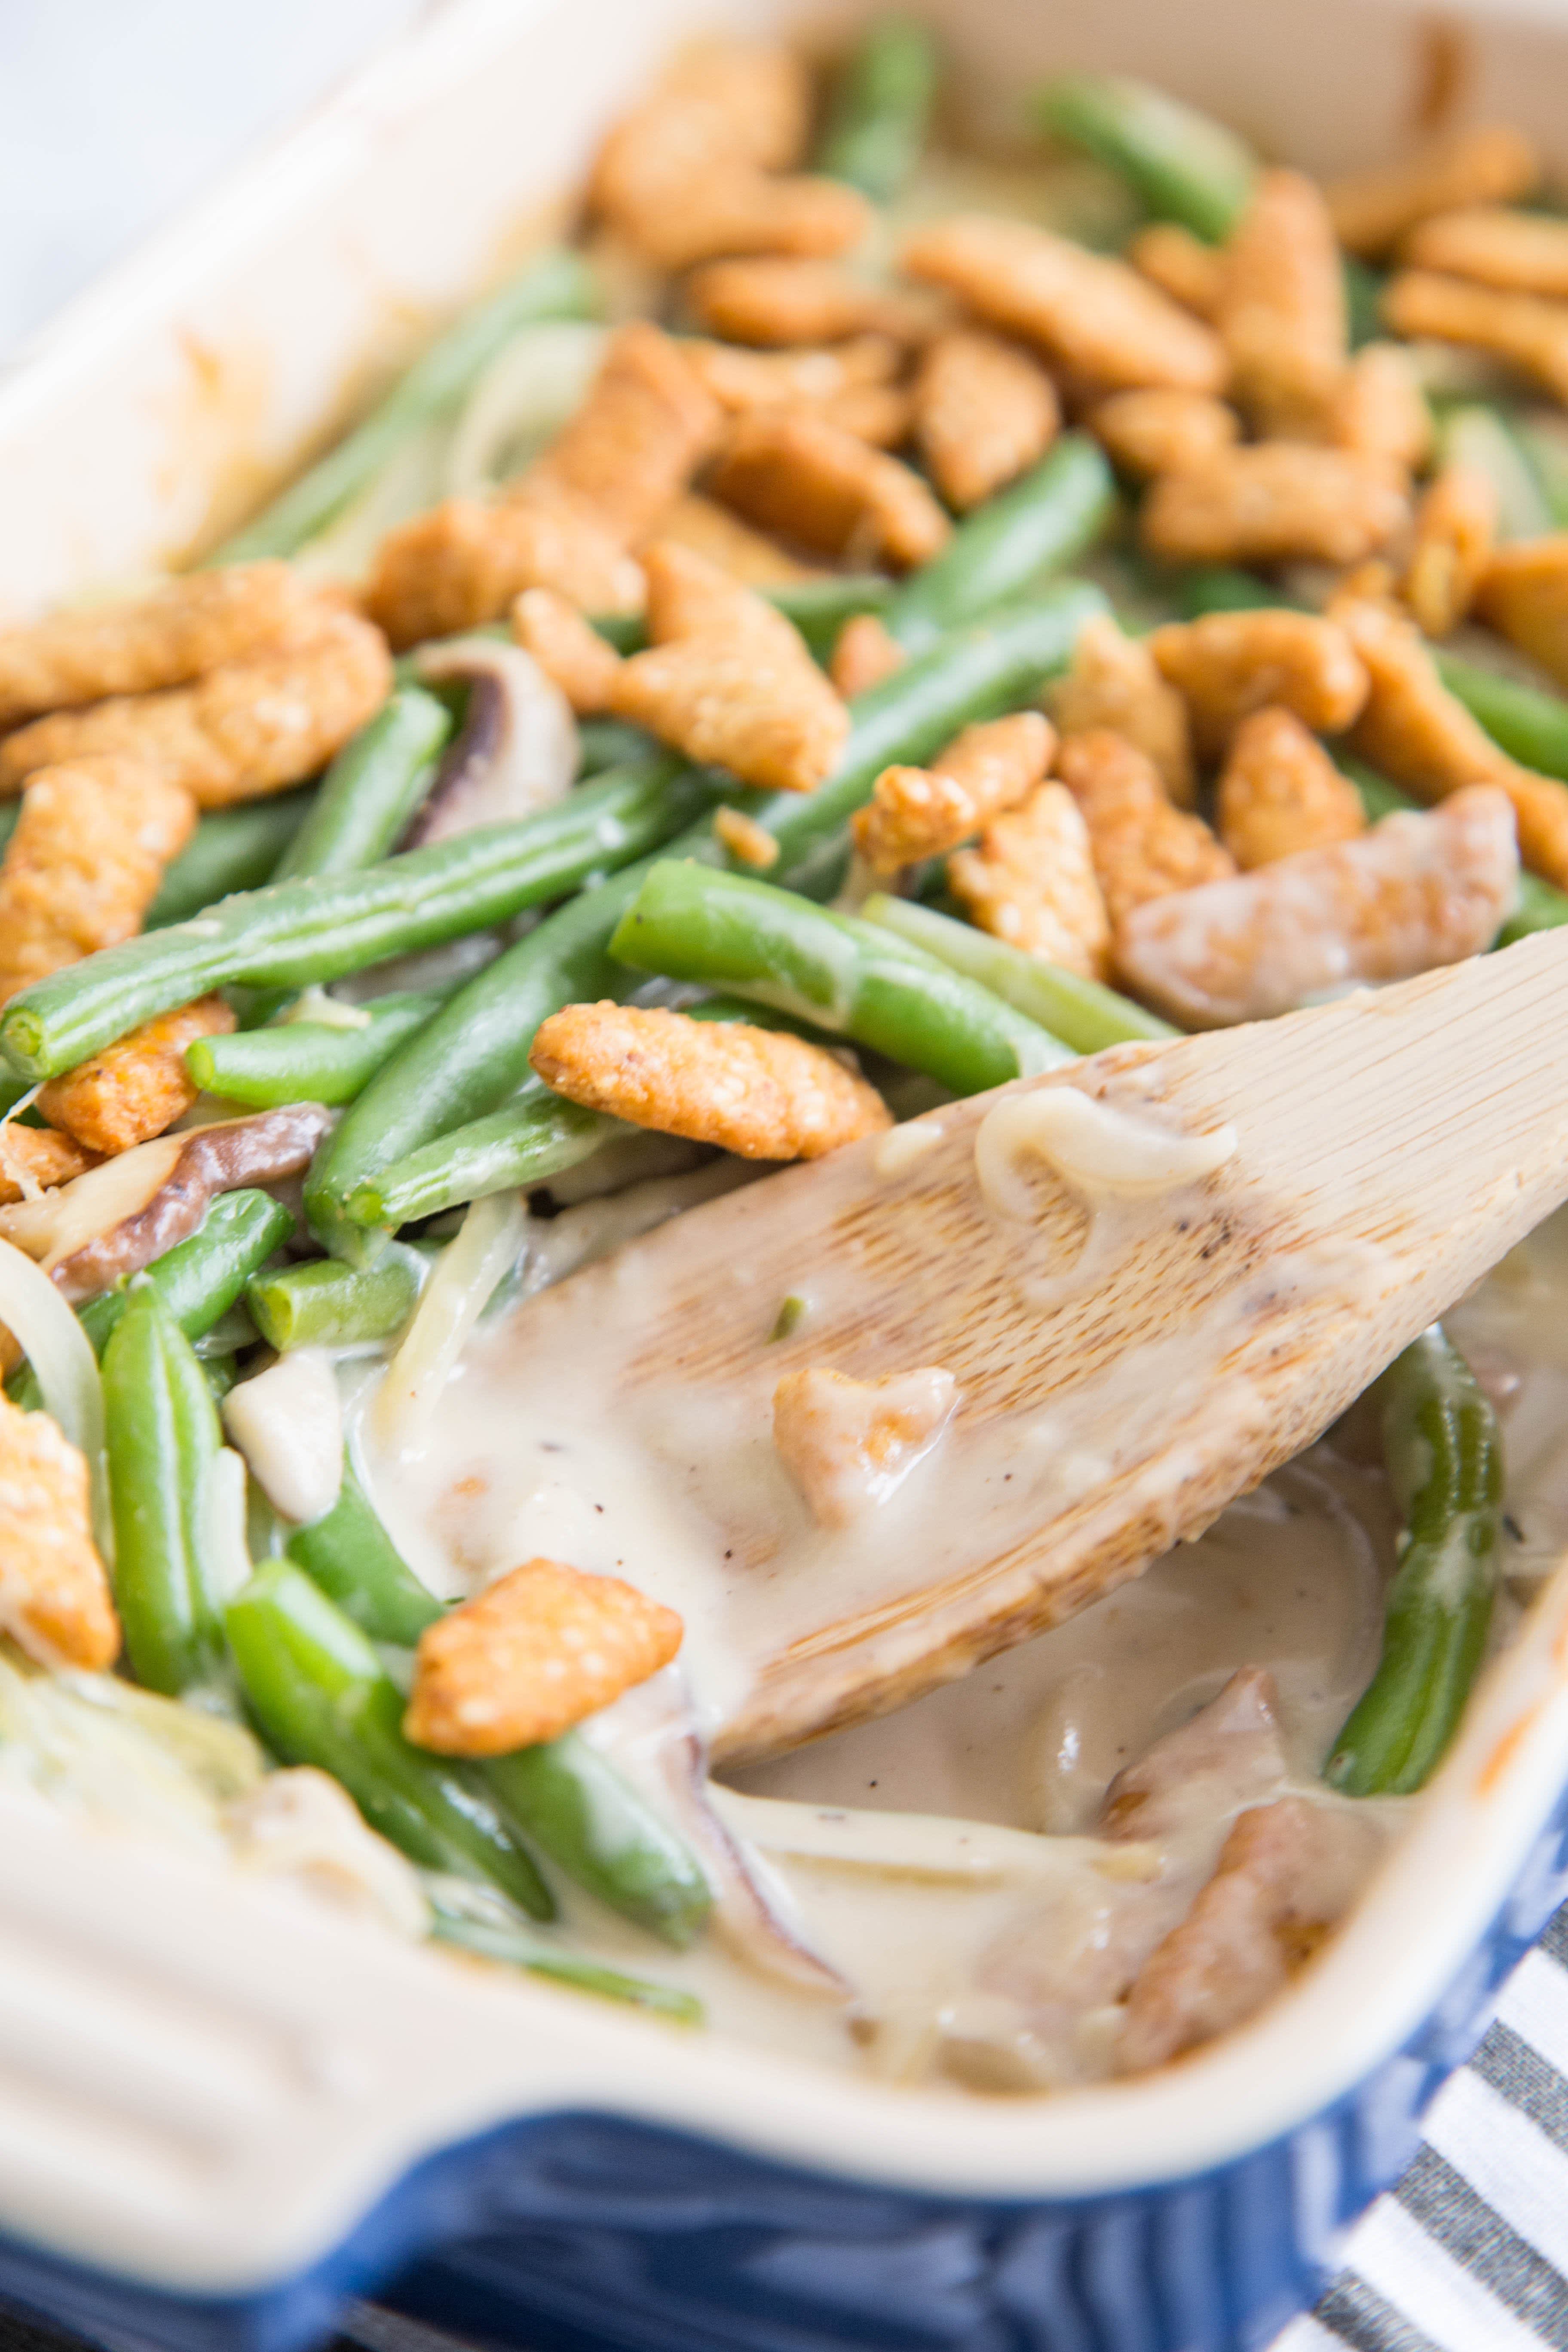 easy green bean casserole with cheese